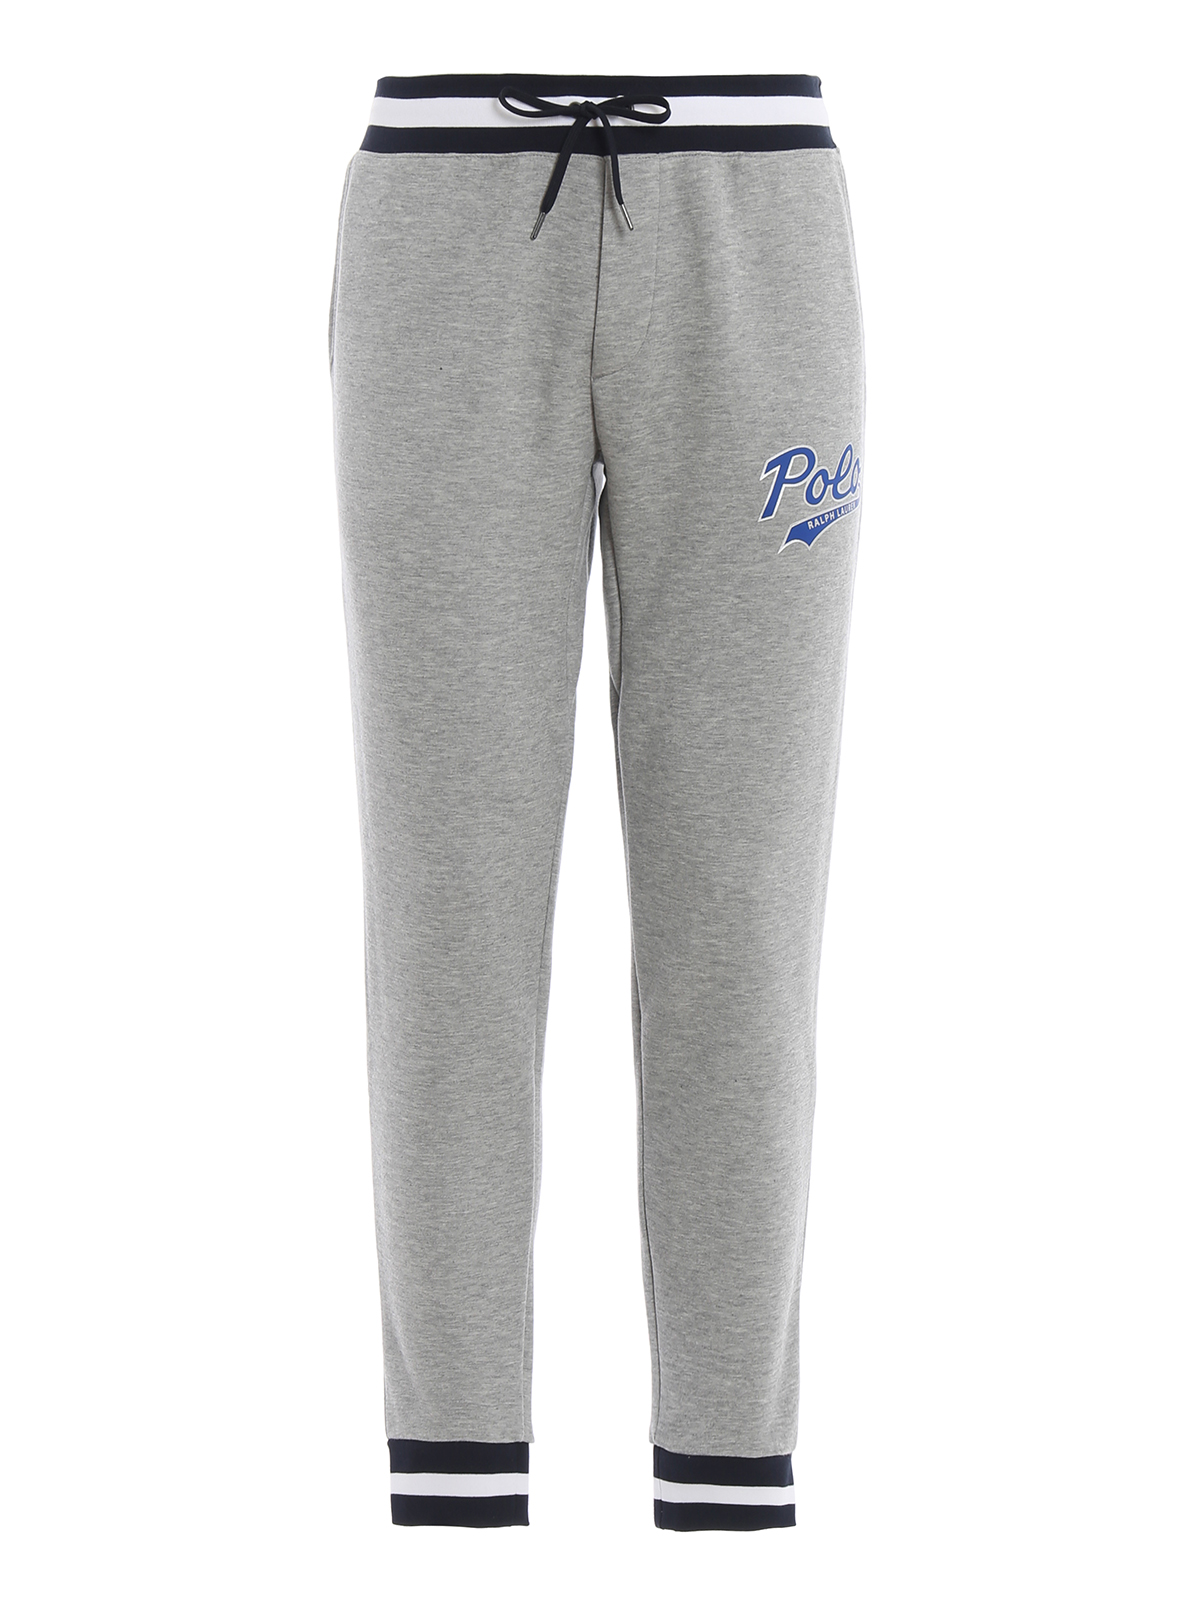 polo tracksuit grey